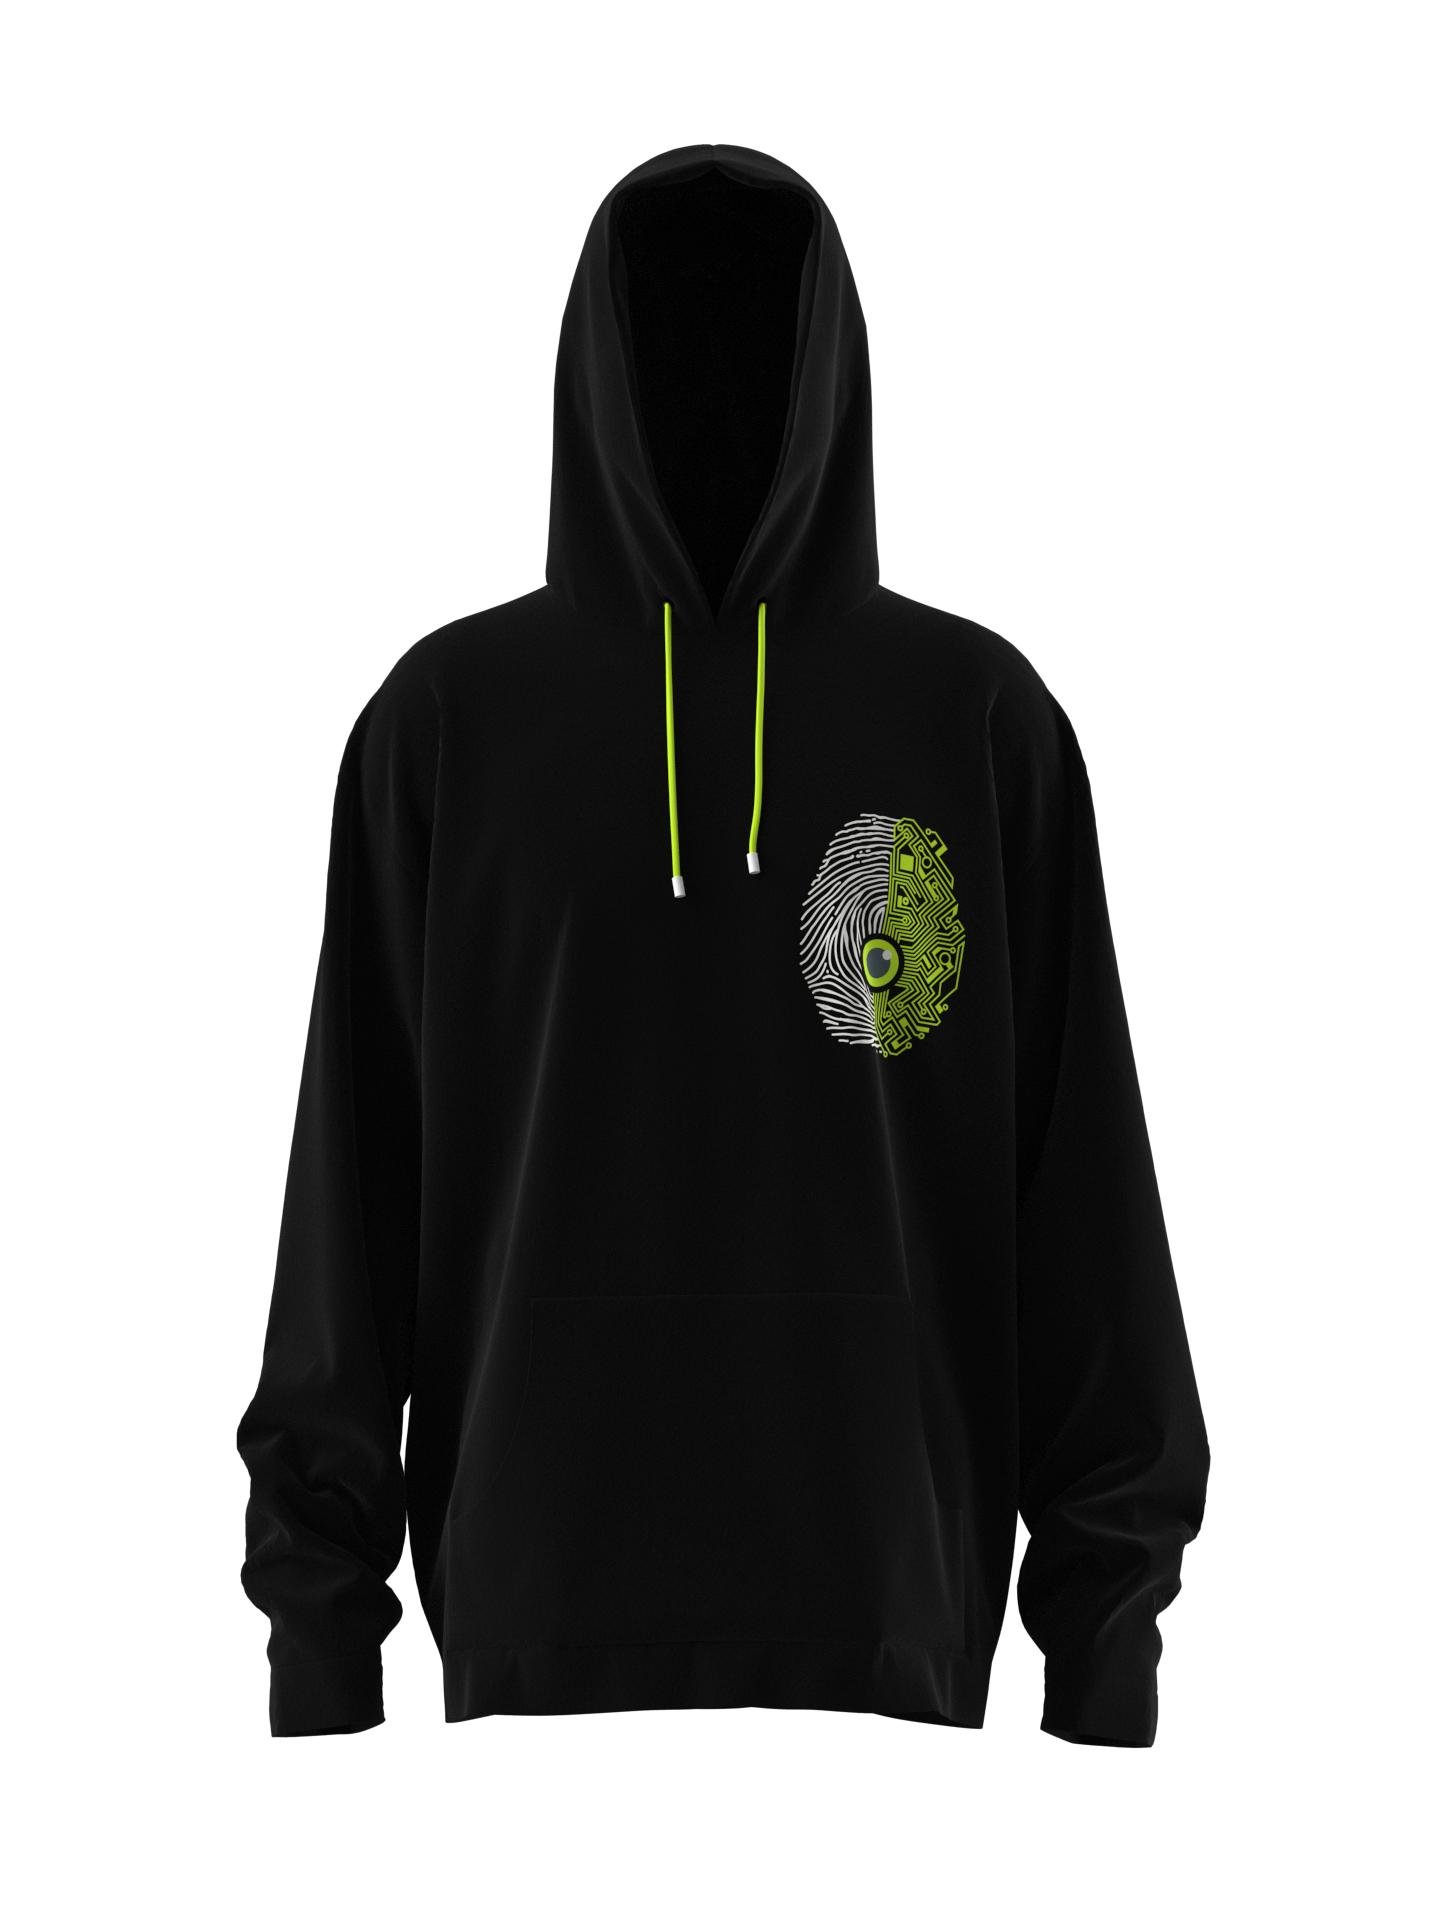 Spine or Technology? Green Hoodie by NATTY GARB